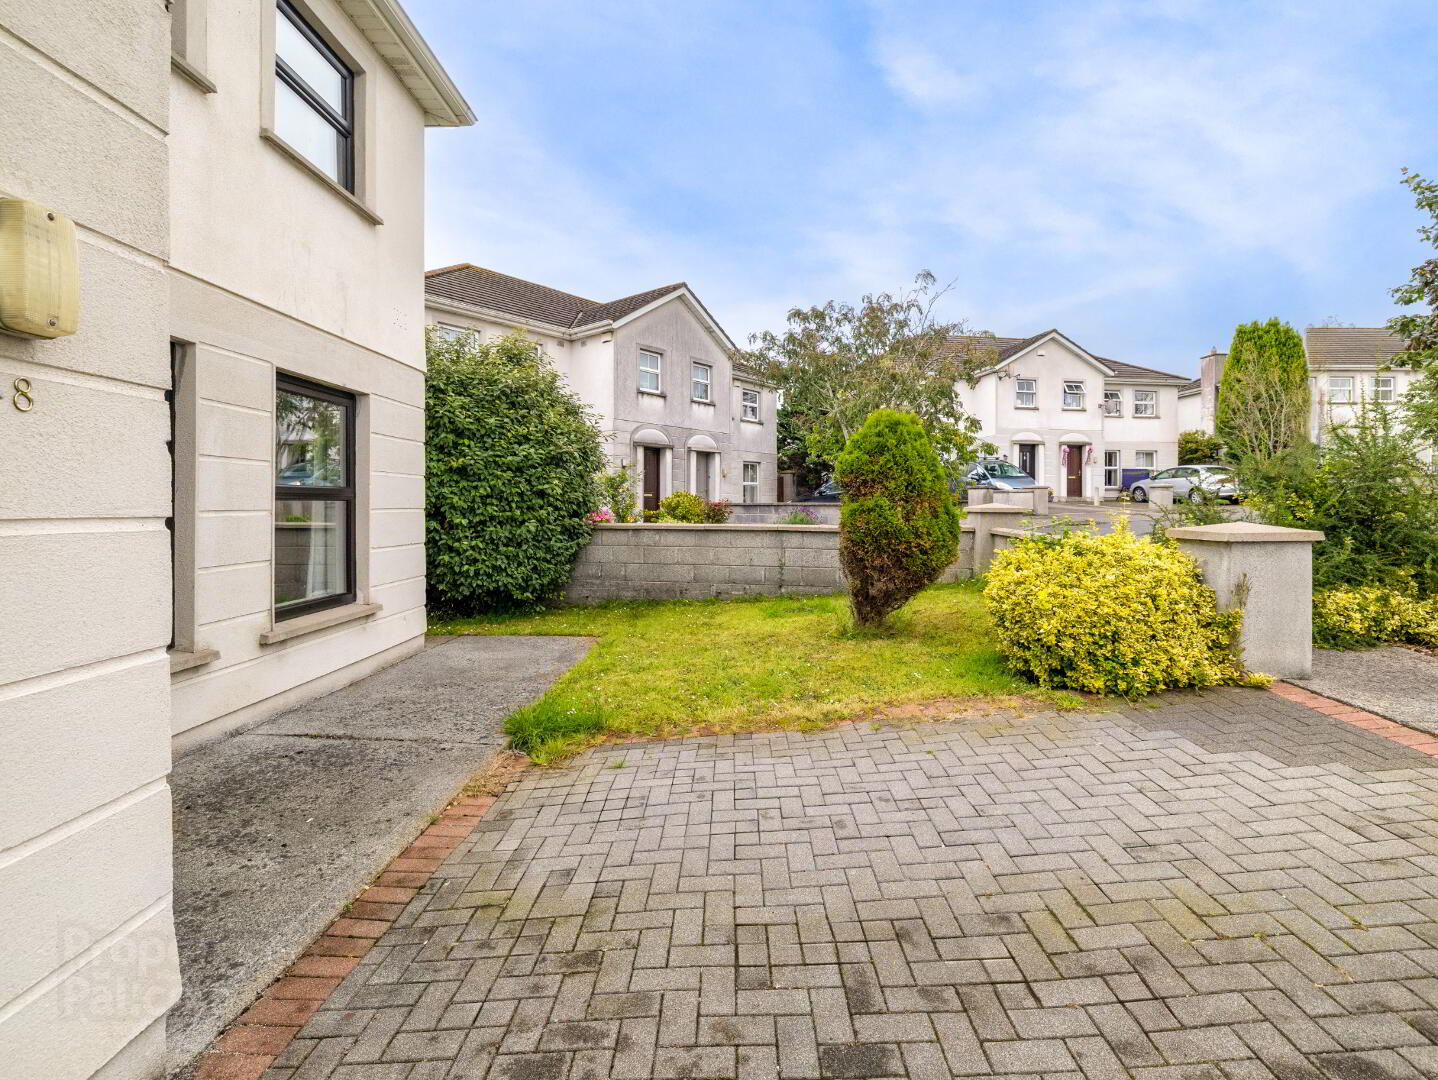 8 The Cloisters, Tullow Road